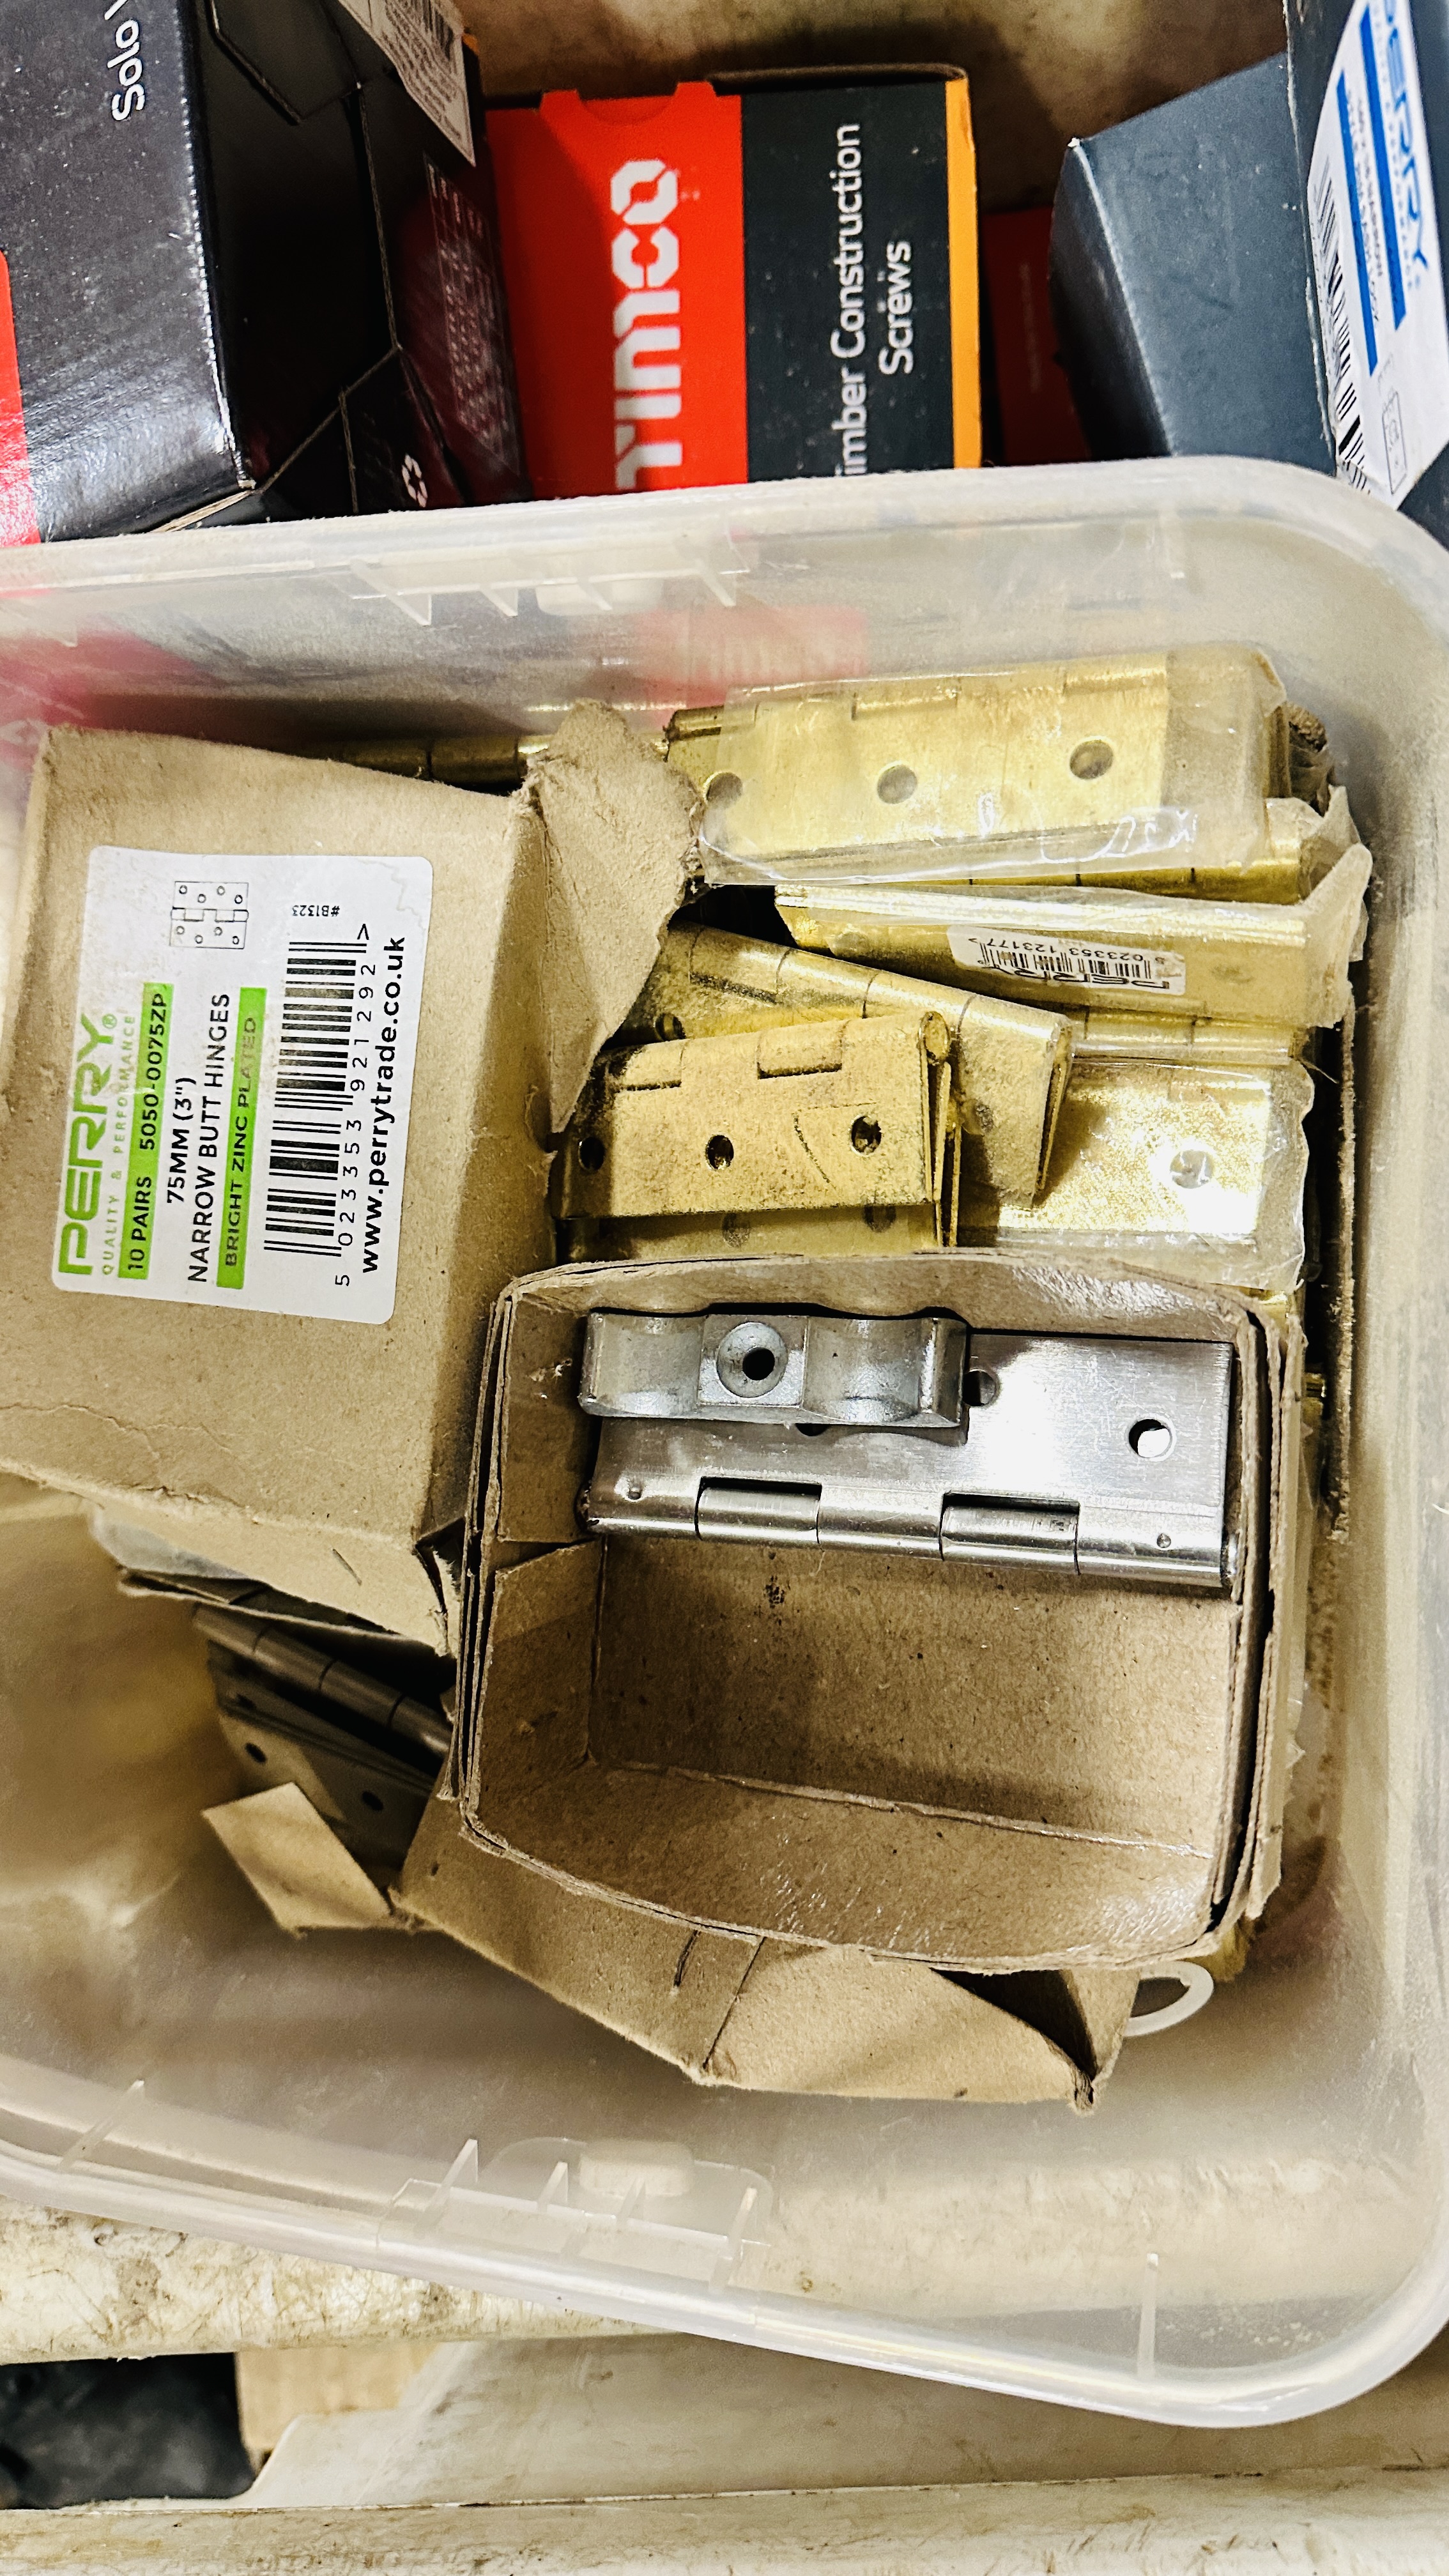 AN EXTENSIVE QUANTITY OF FIXINGS AND FITTINGS, DOOR FITTINGS & FURNITURE LOCKS, LATCH LOCKS, - Image 14 of 28